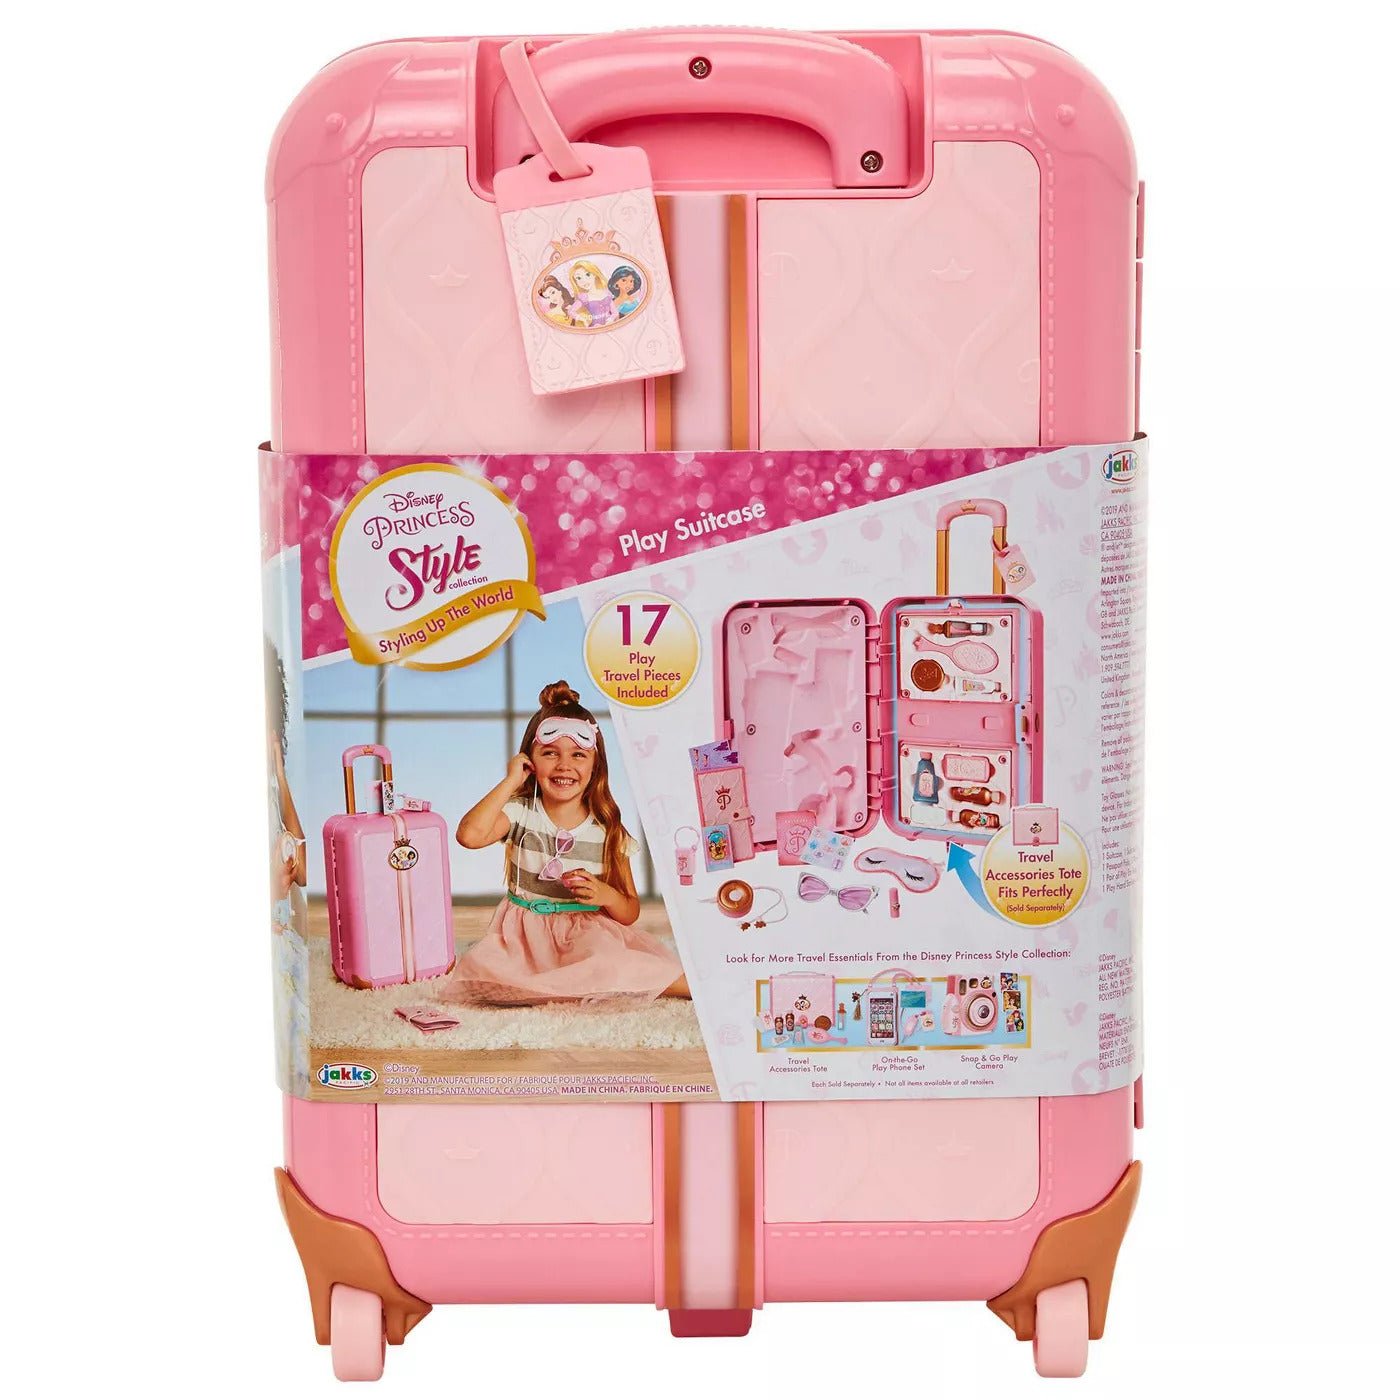 Disney Princess Style Collection - Play Suitcase